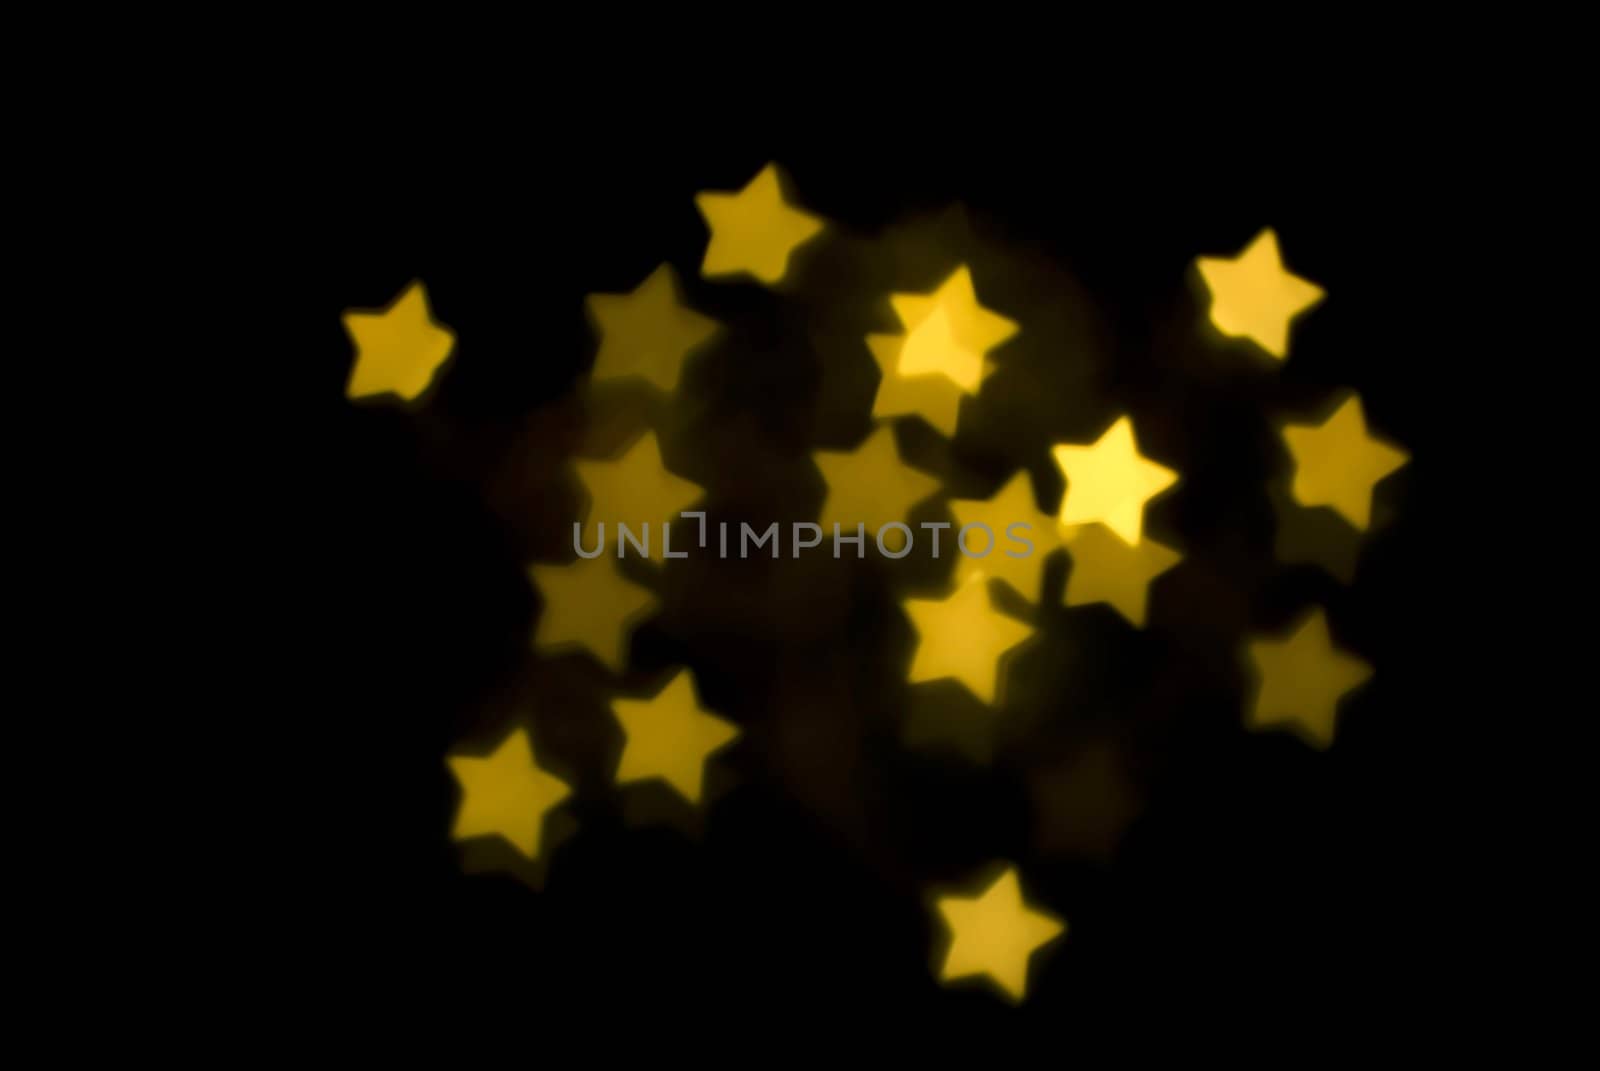 a background image of yellow gold bokeh stars